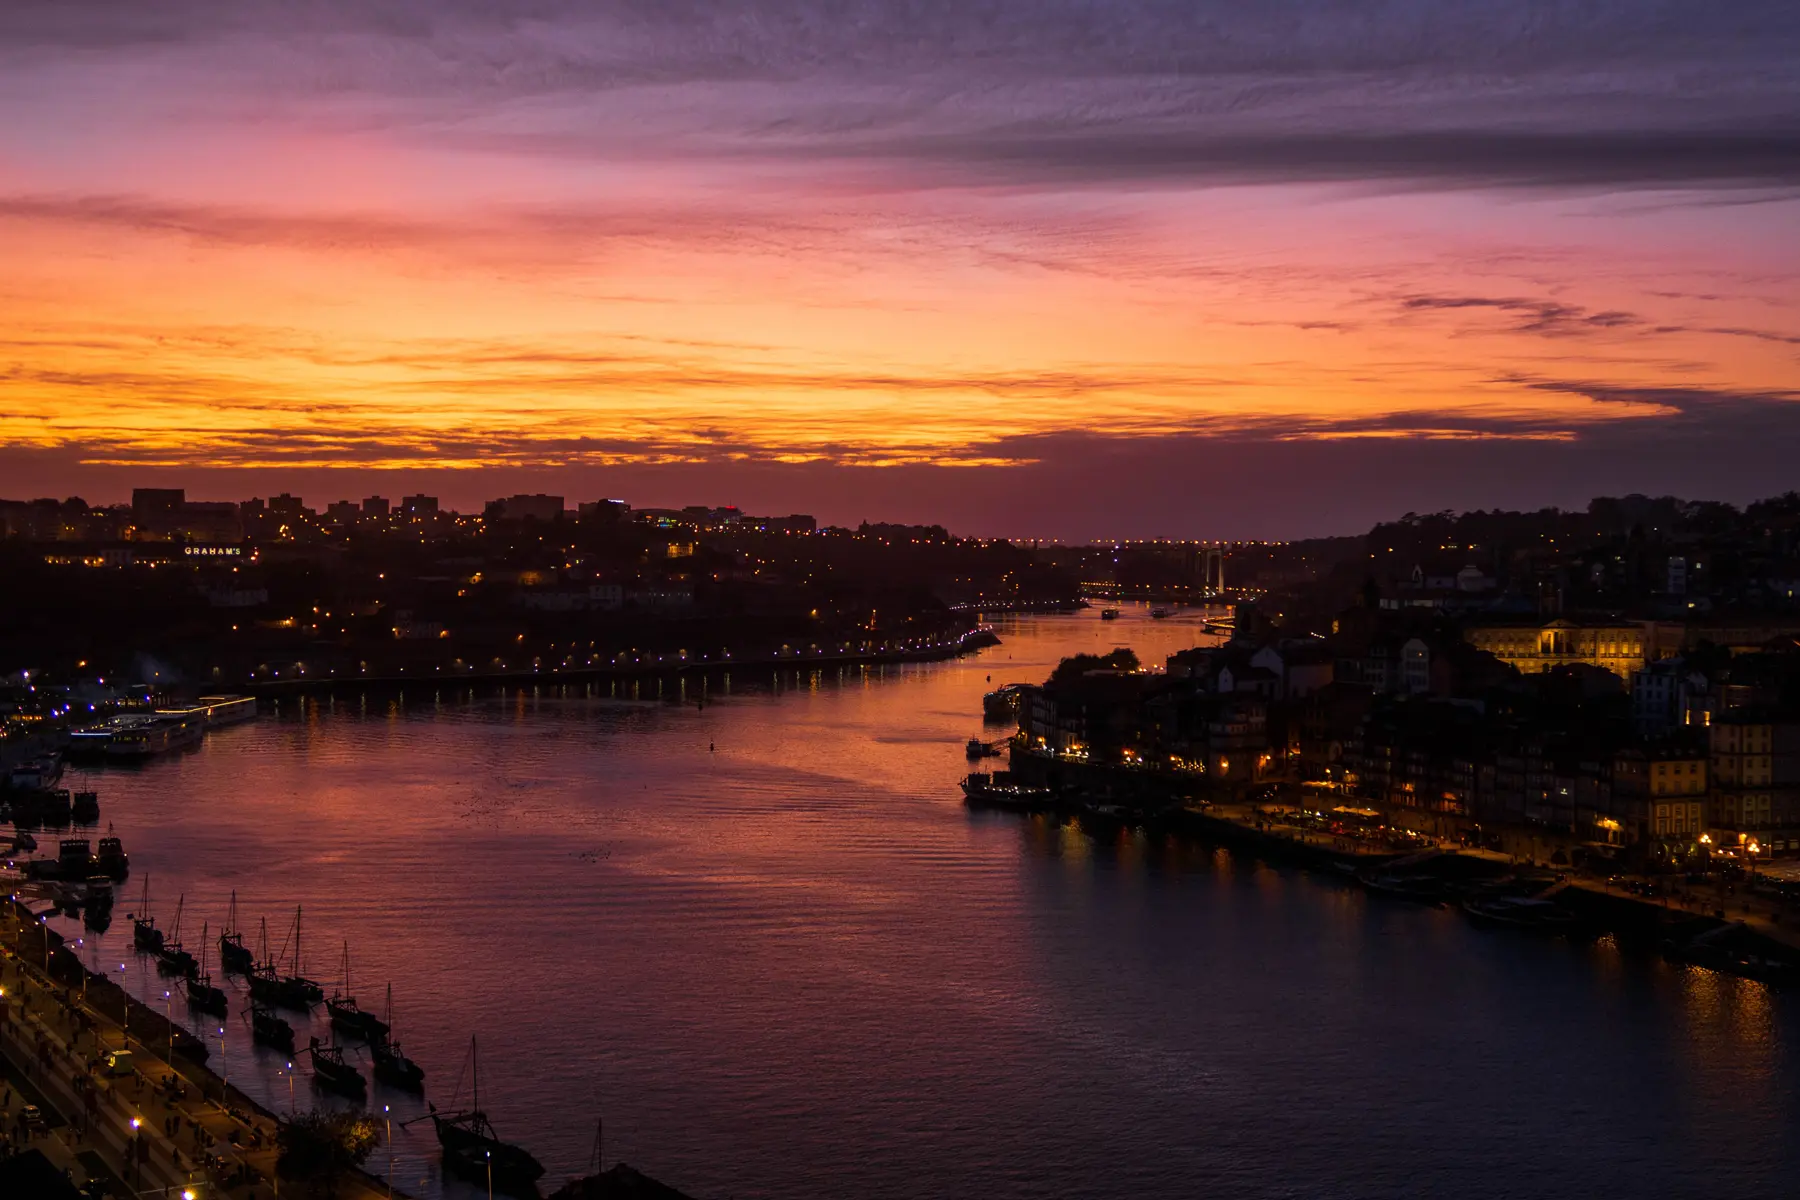 The Douro River at sunset, photo by Alp Ancel